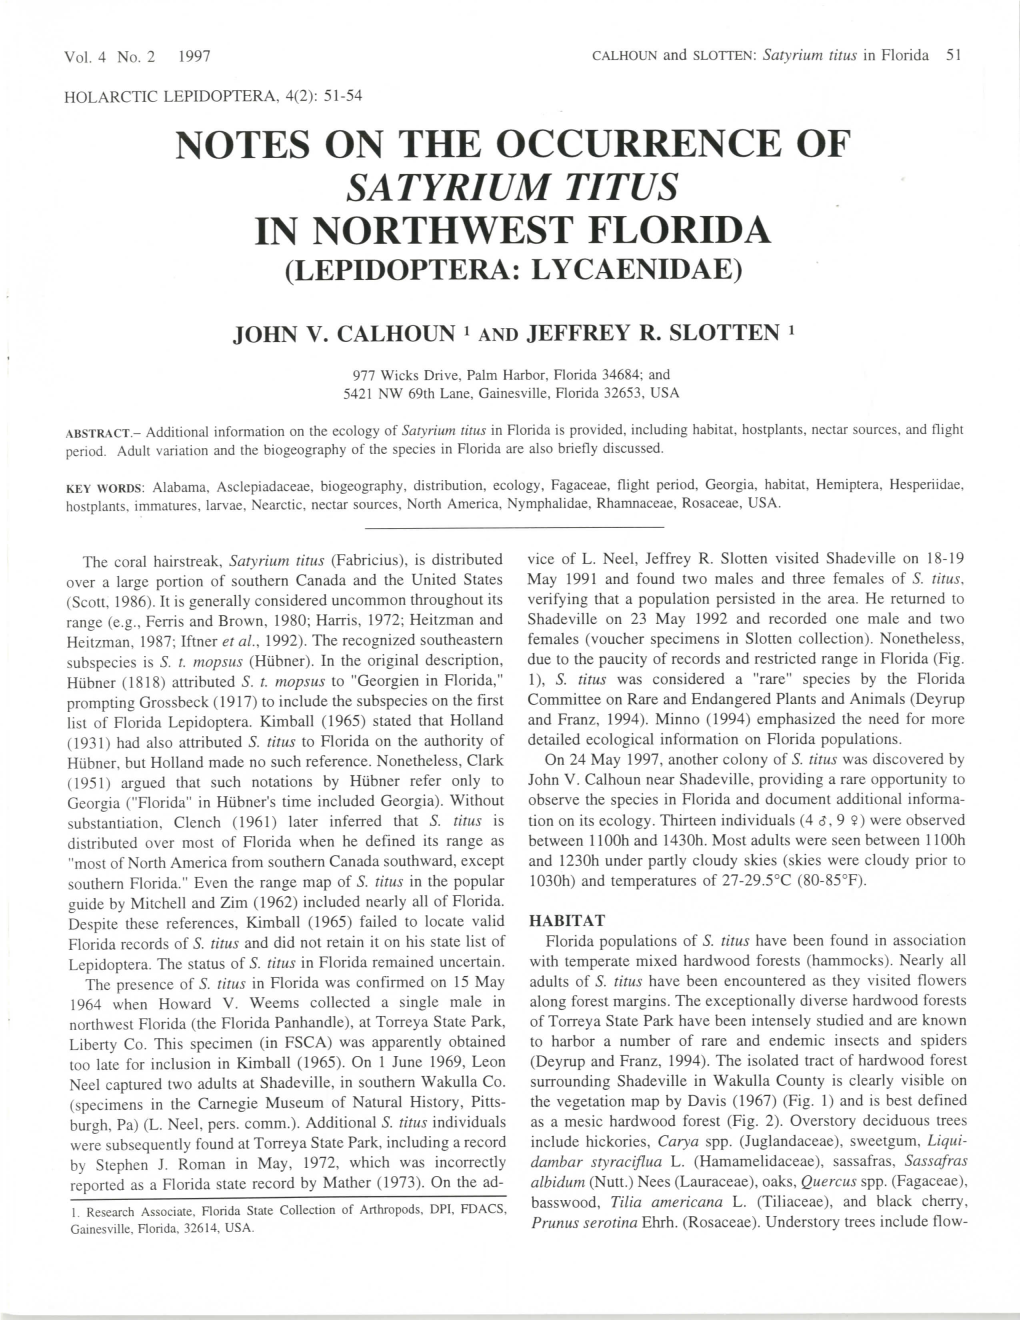 Notes on the Occurrence of Satyrium Titus in Northwest Florida (Lepidoptera: Lycaenidae)